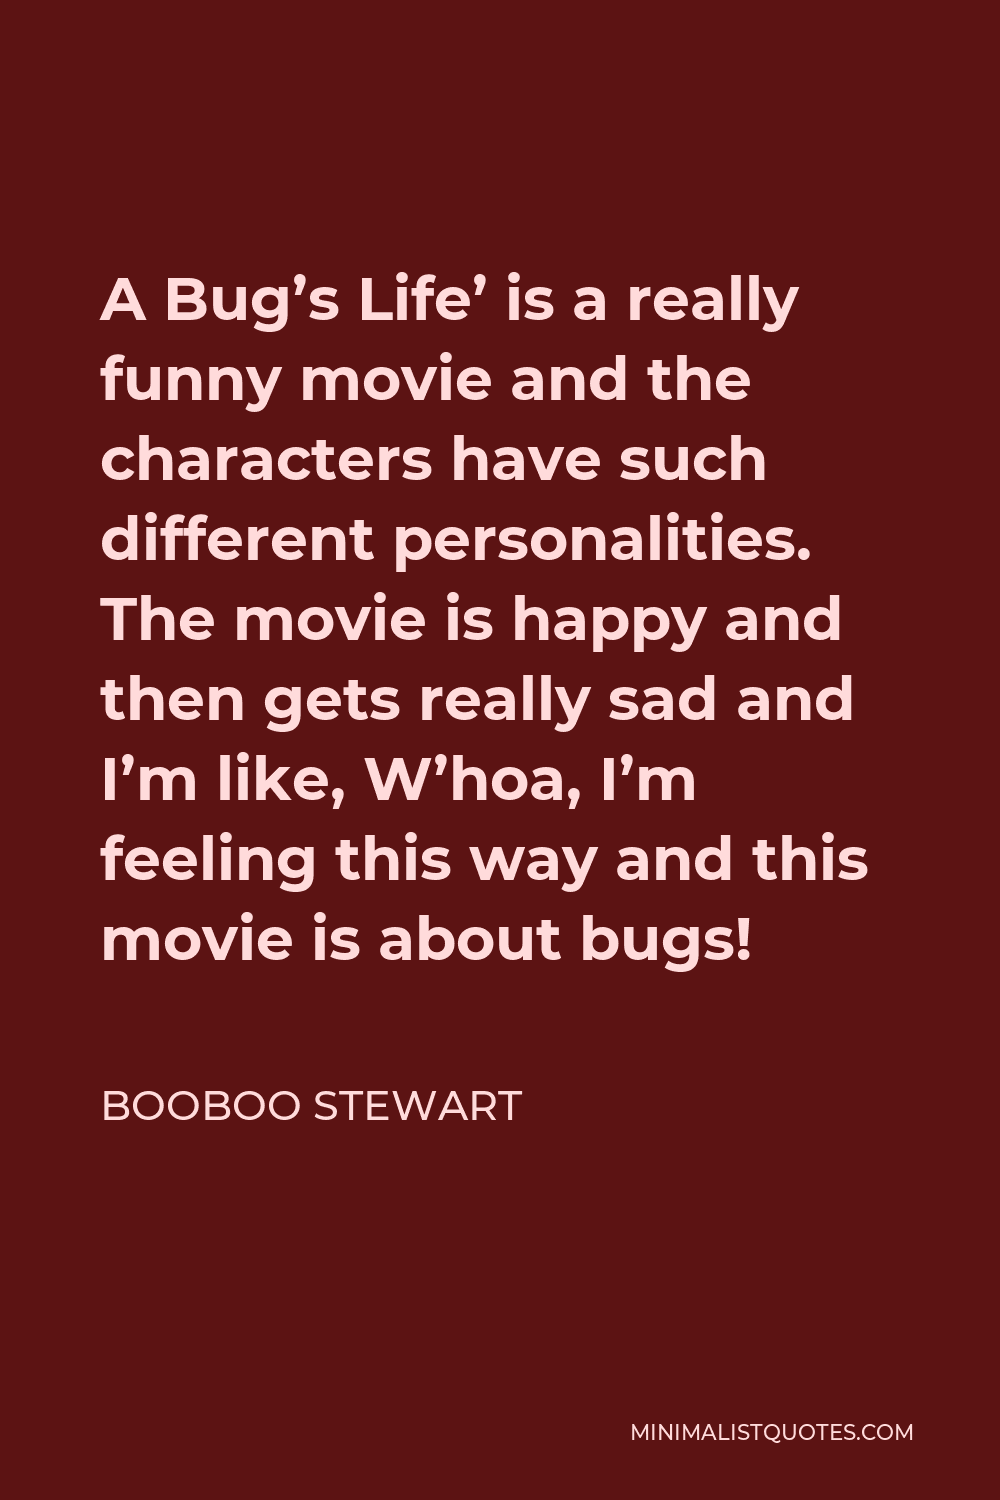 Booboo Stewart Quote: A Bug's Life' is a really funny movie and the  characters have such different personalities. The movie is happy and then  gets really sad and I'm like, W'hoa, I'm